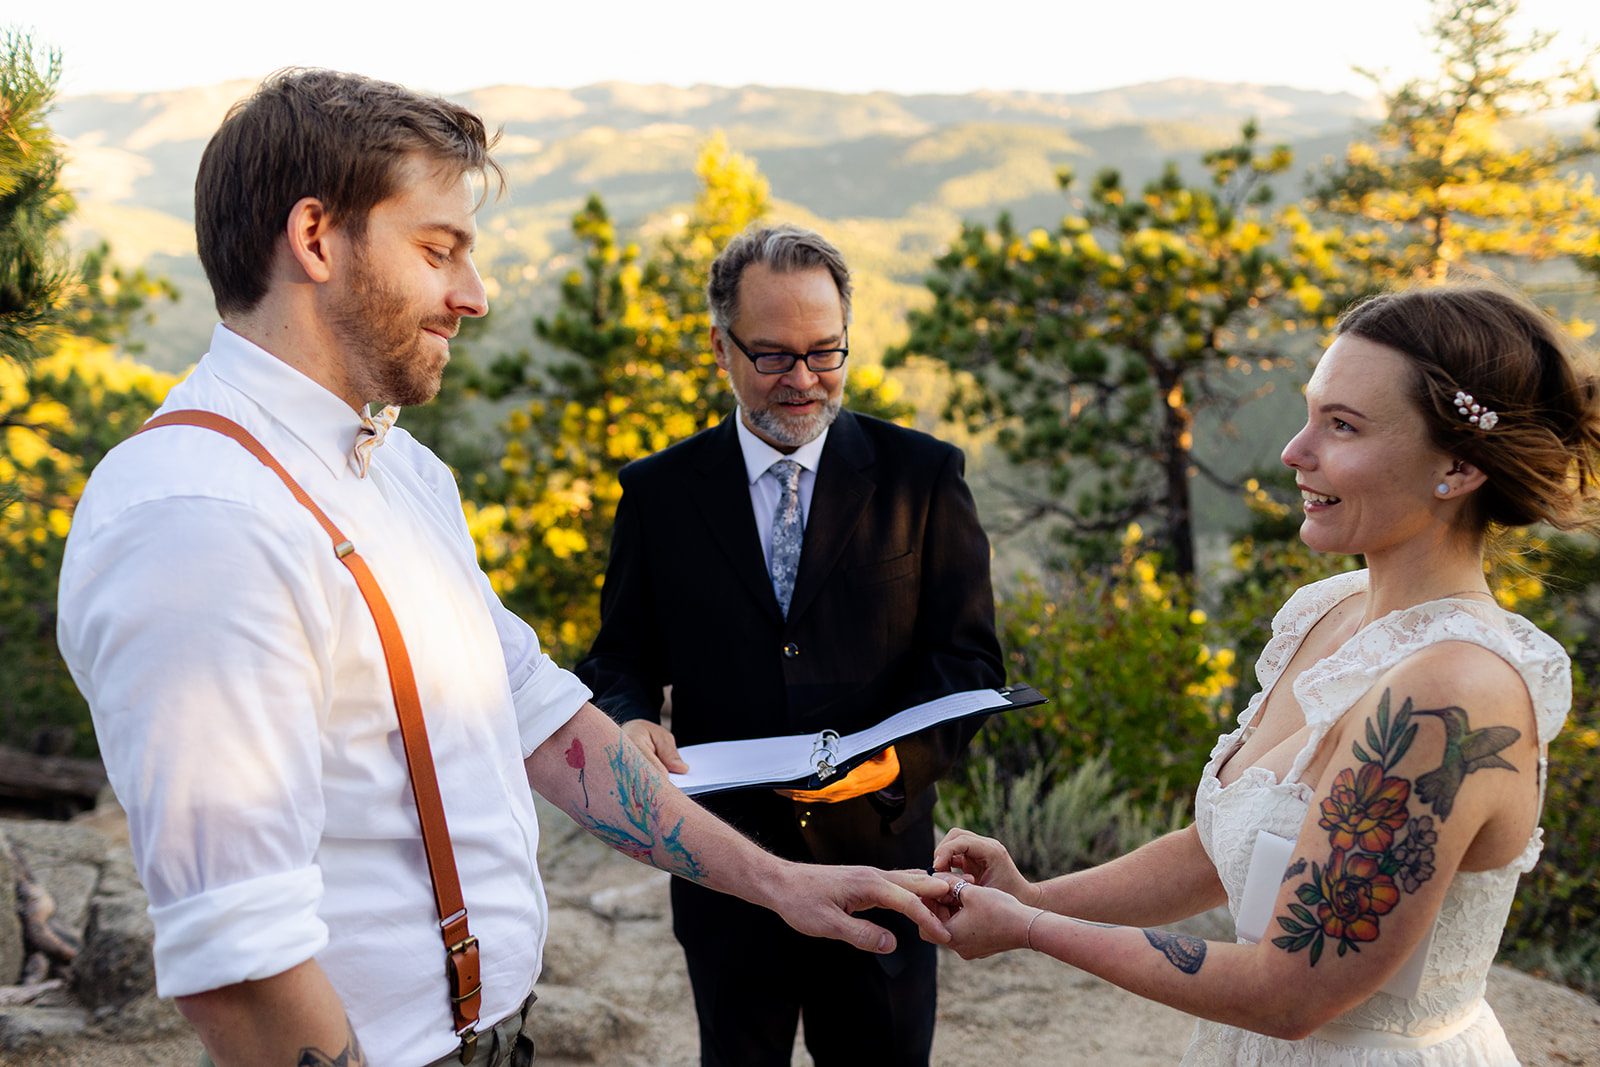 Bride slides ring on grooms hand at Artist Point for their sunrise elopement ceremony